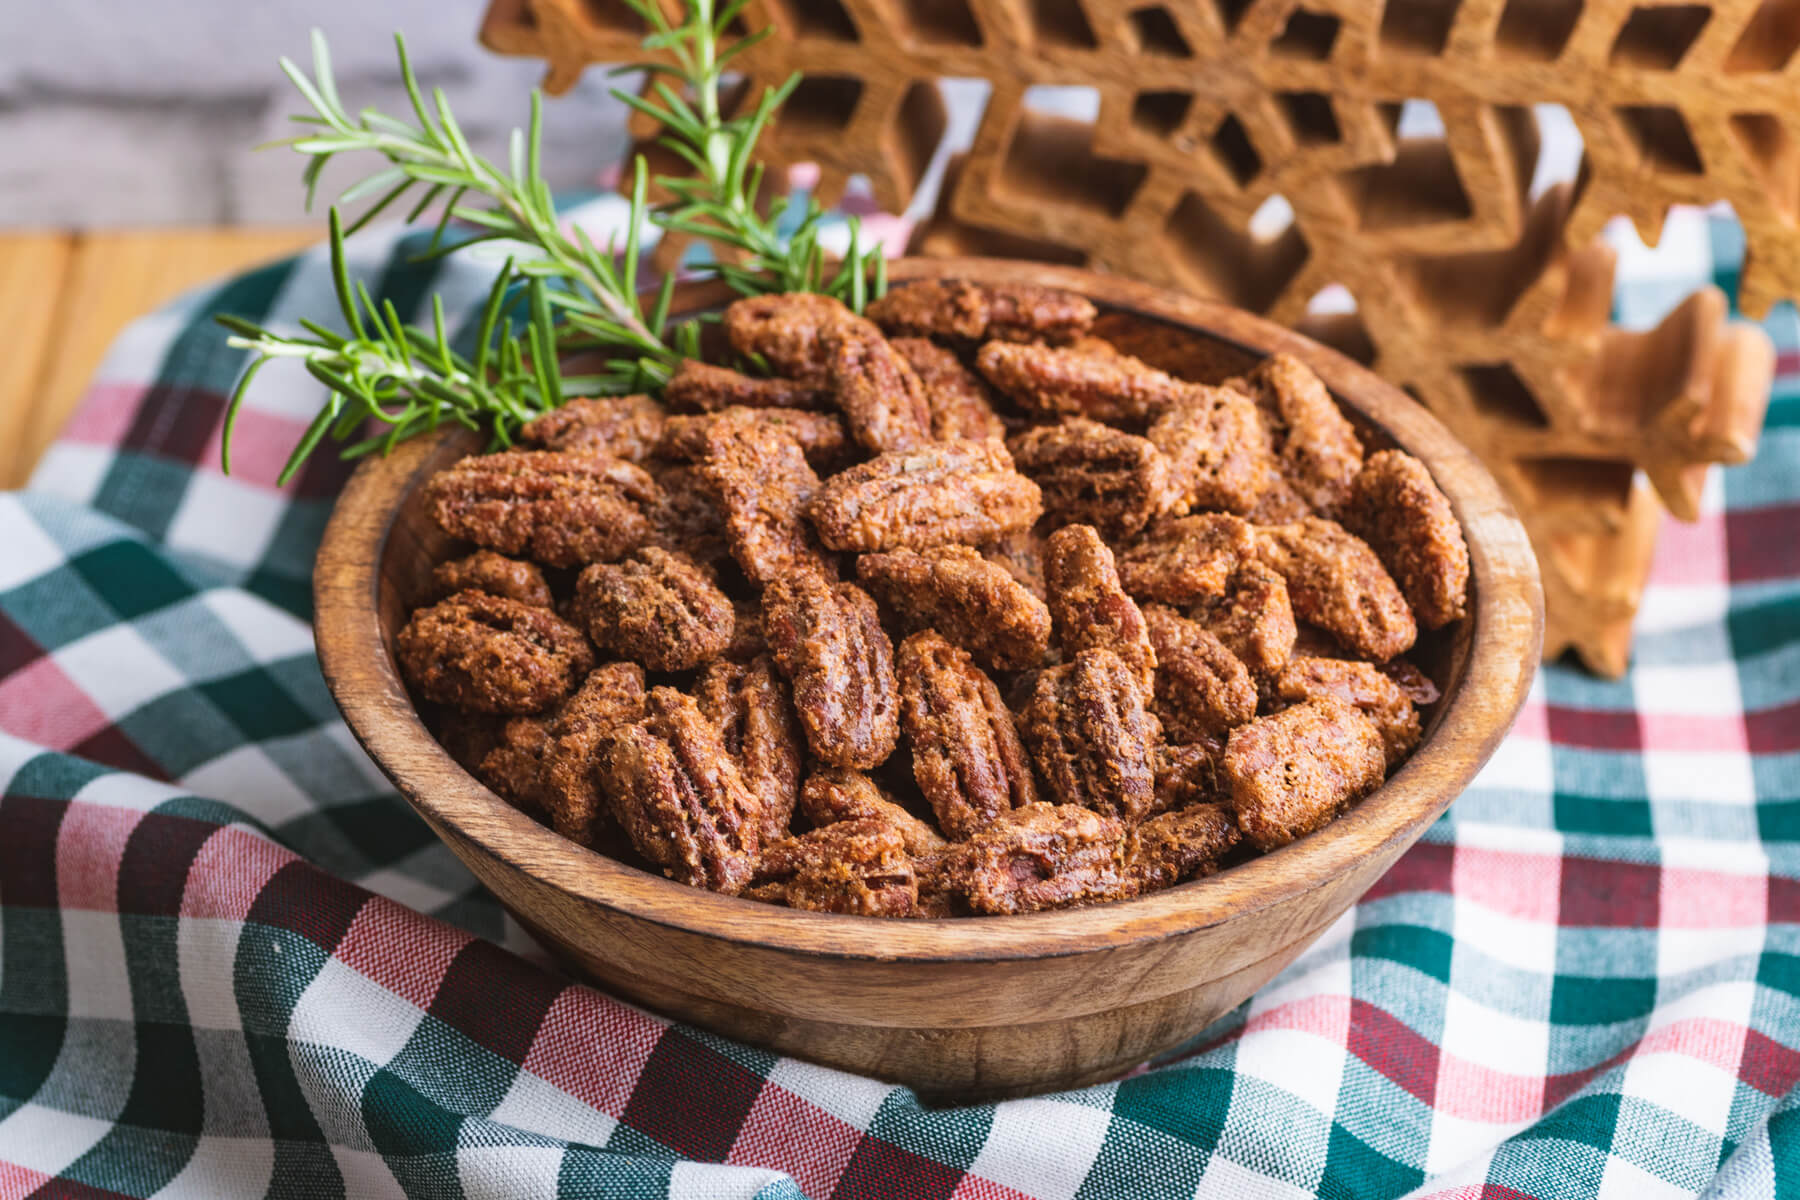 A wooden bowl filled with candied pecan halves and fresh rosemary garnish on a plaid tablecloth.